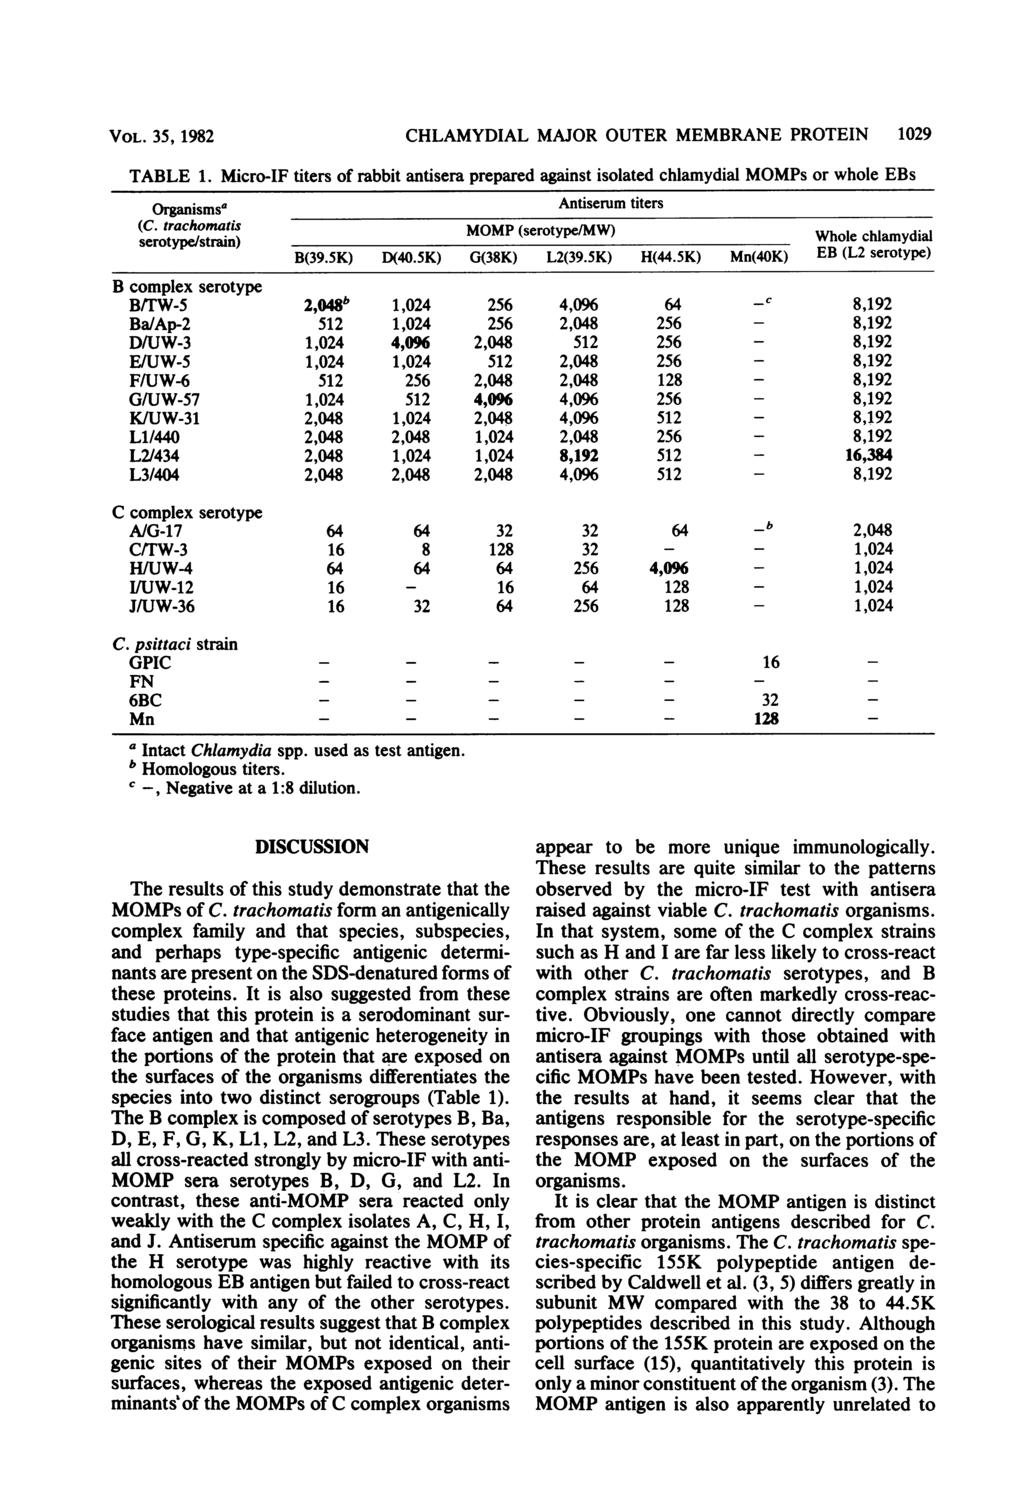 VOL. 35, 1982 TABLE 1. CHLAMYDIAL MAJOR OUTER MEMBRANE PROTEIN 1029 Micro-IF titers of rabbit antisera prepared against isolated chlamydial MOMPs or whole EBs Organismsa Antiserum titers (C.